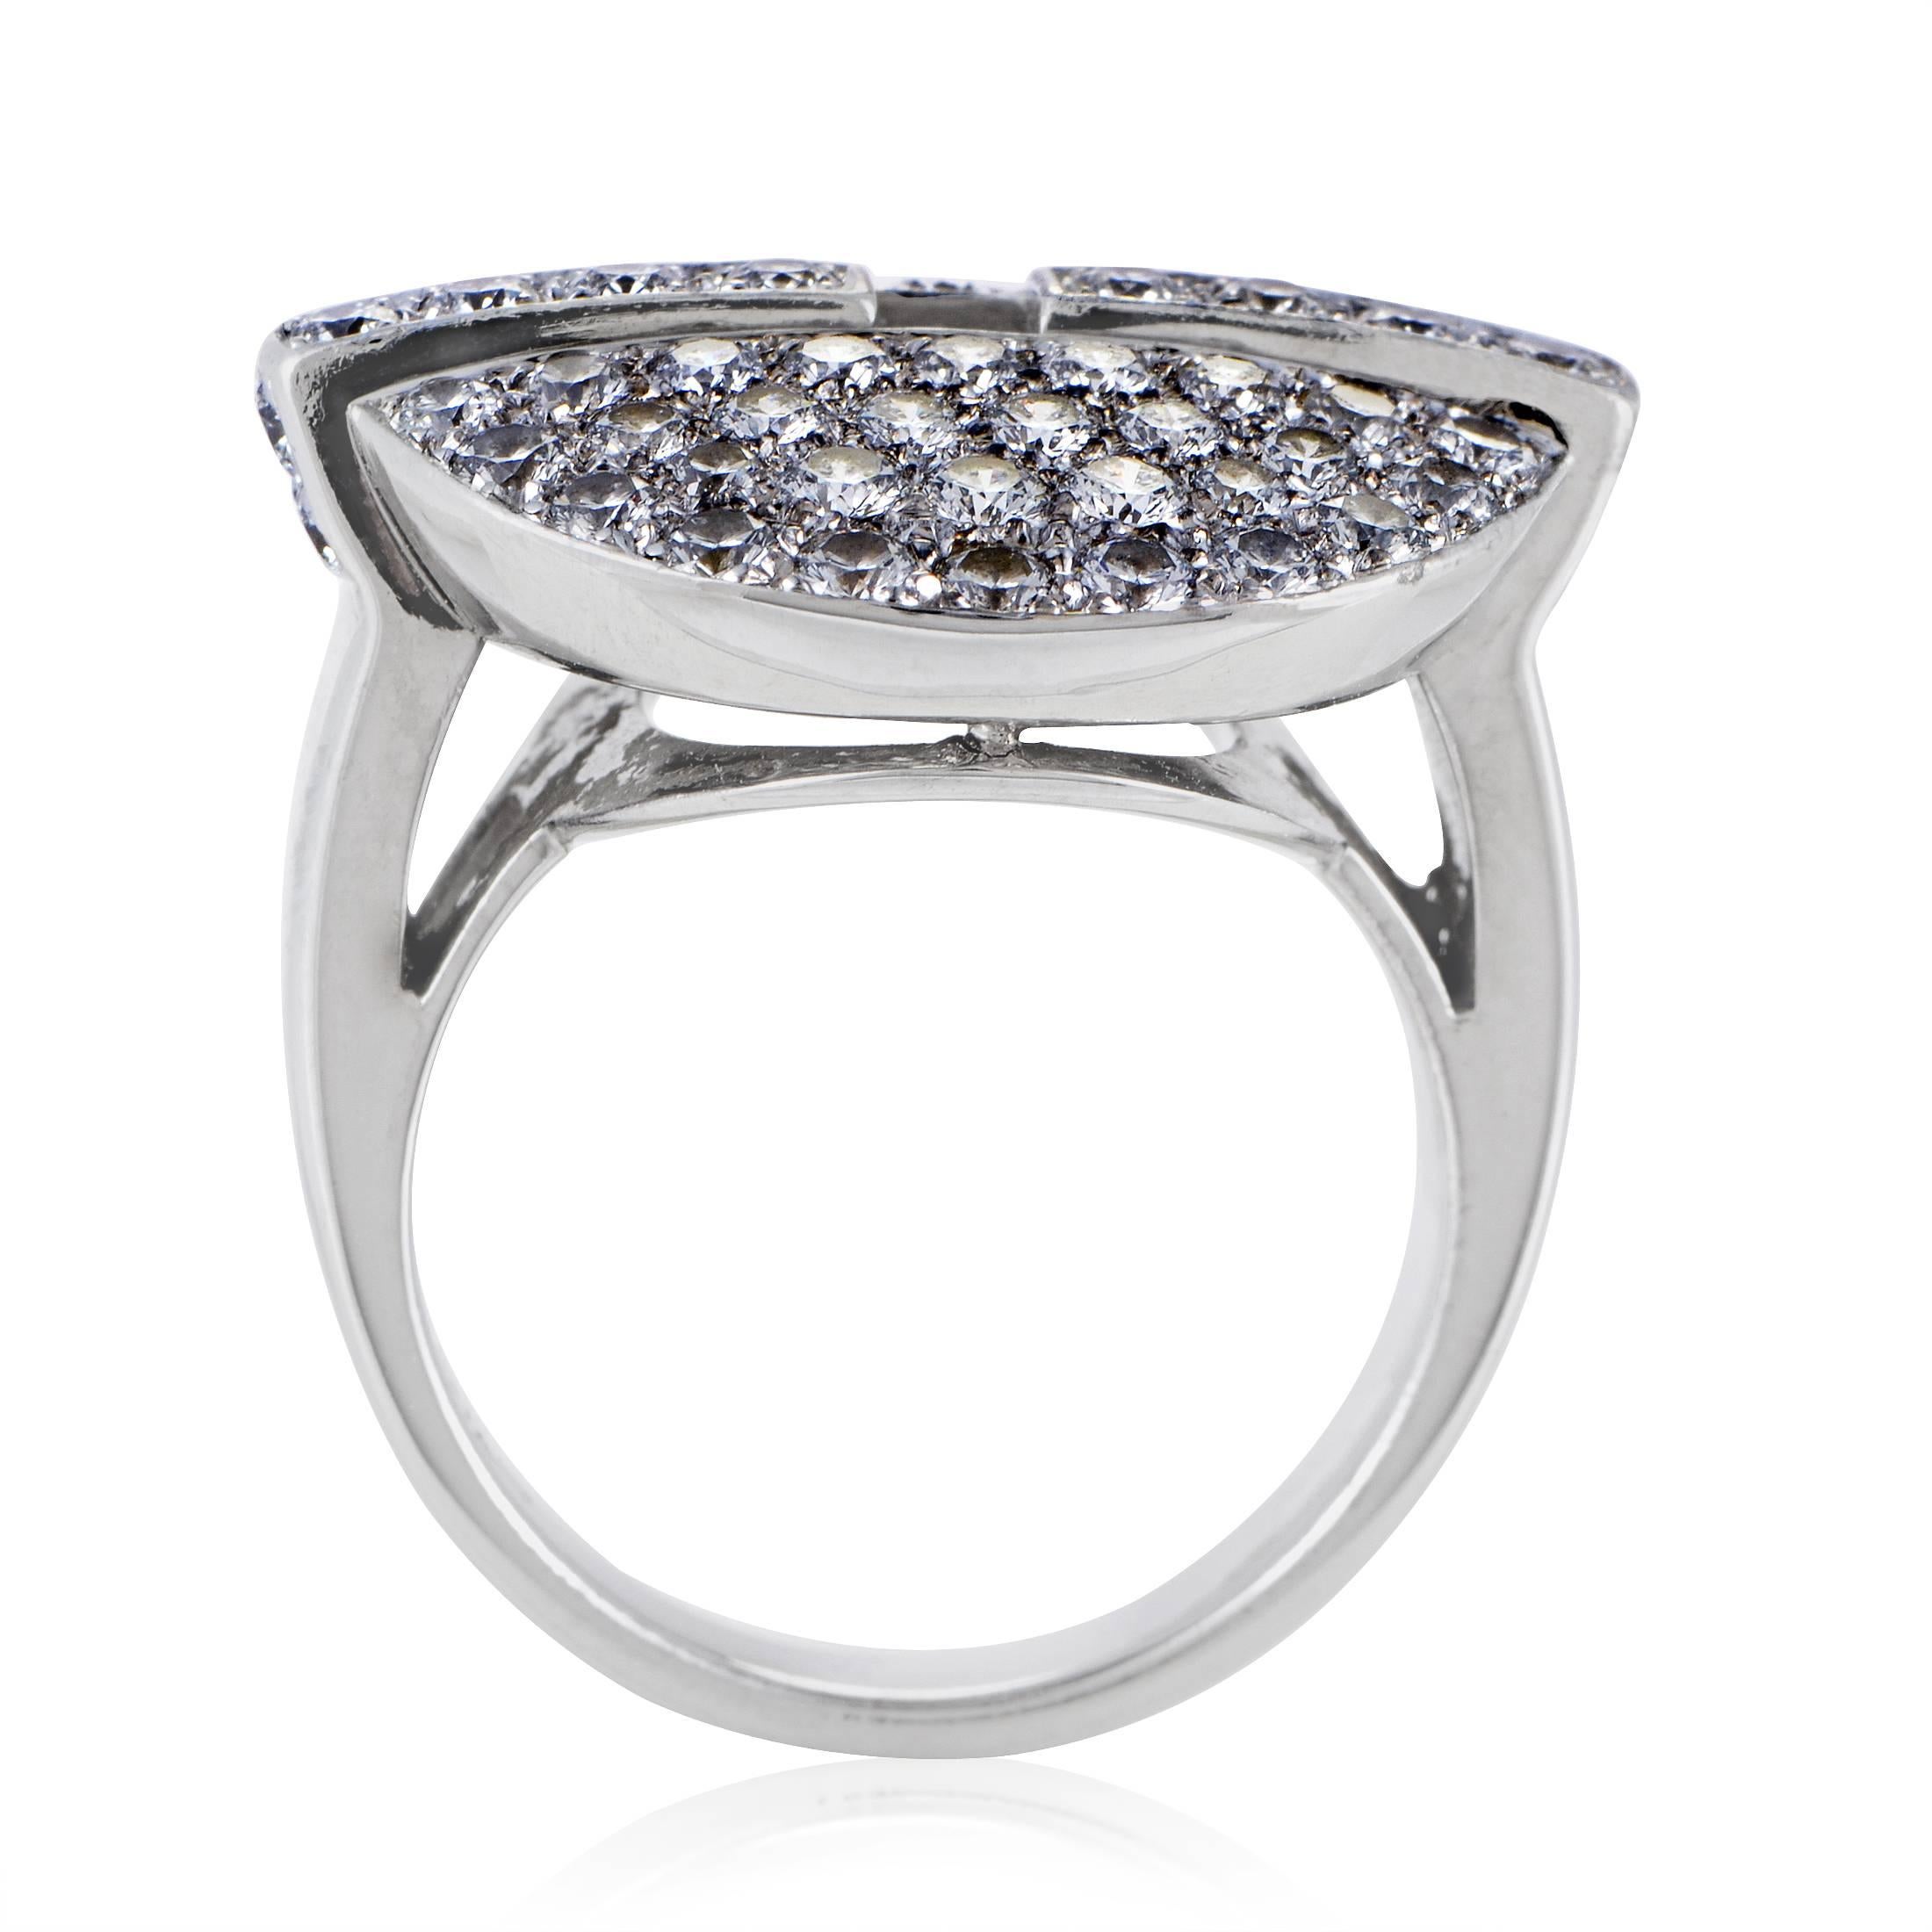 This fabulous design from Cartier's Himalia collection is decadent and divine! The ring is made of 18K white gold and boasts the renowned Himalia motif paved with 2.25ct of diamonds.
Ring Size: 5.5(50)
Ring Top Dimensions: 22 x 20mm
Band